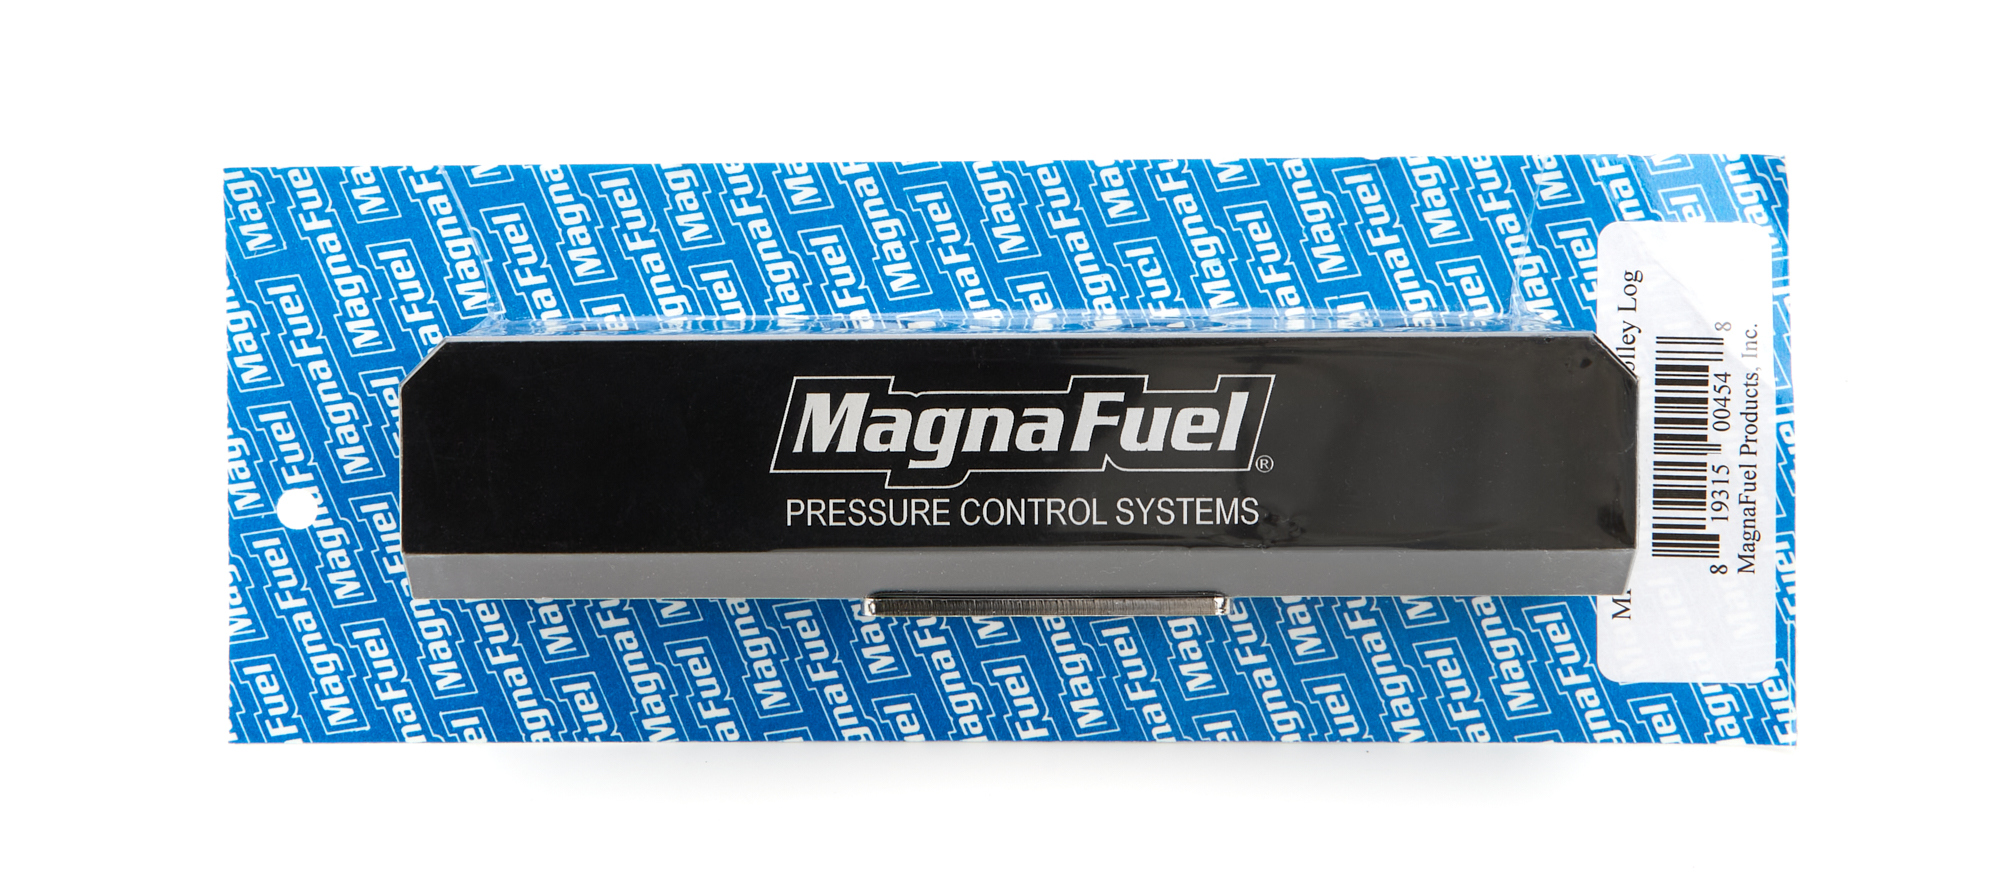 Magnafuel MP-7610-04-BLK Fuel Block, Two 10 AN Female O-Ring Ports, Four 8 AN Female O-Ring Ports, Aluminum, Black Anodized, Each